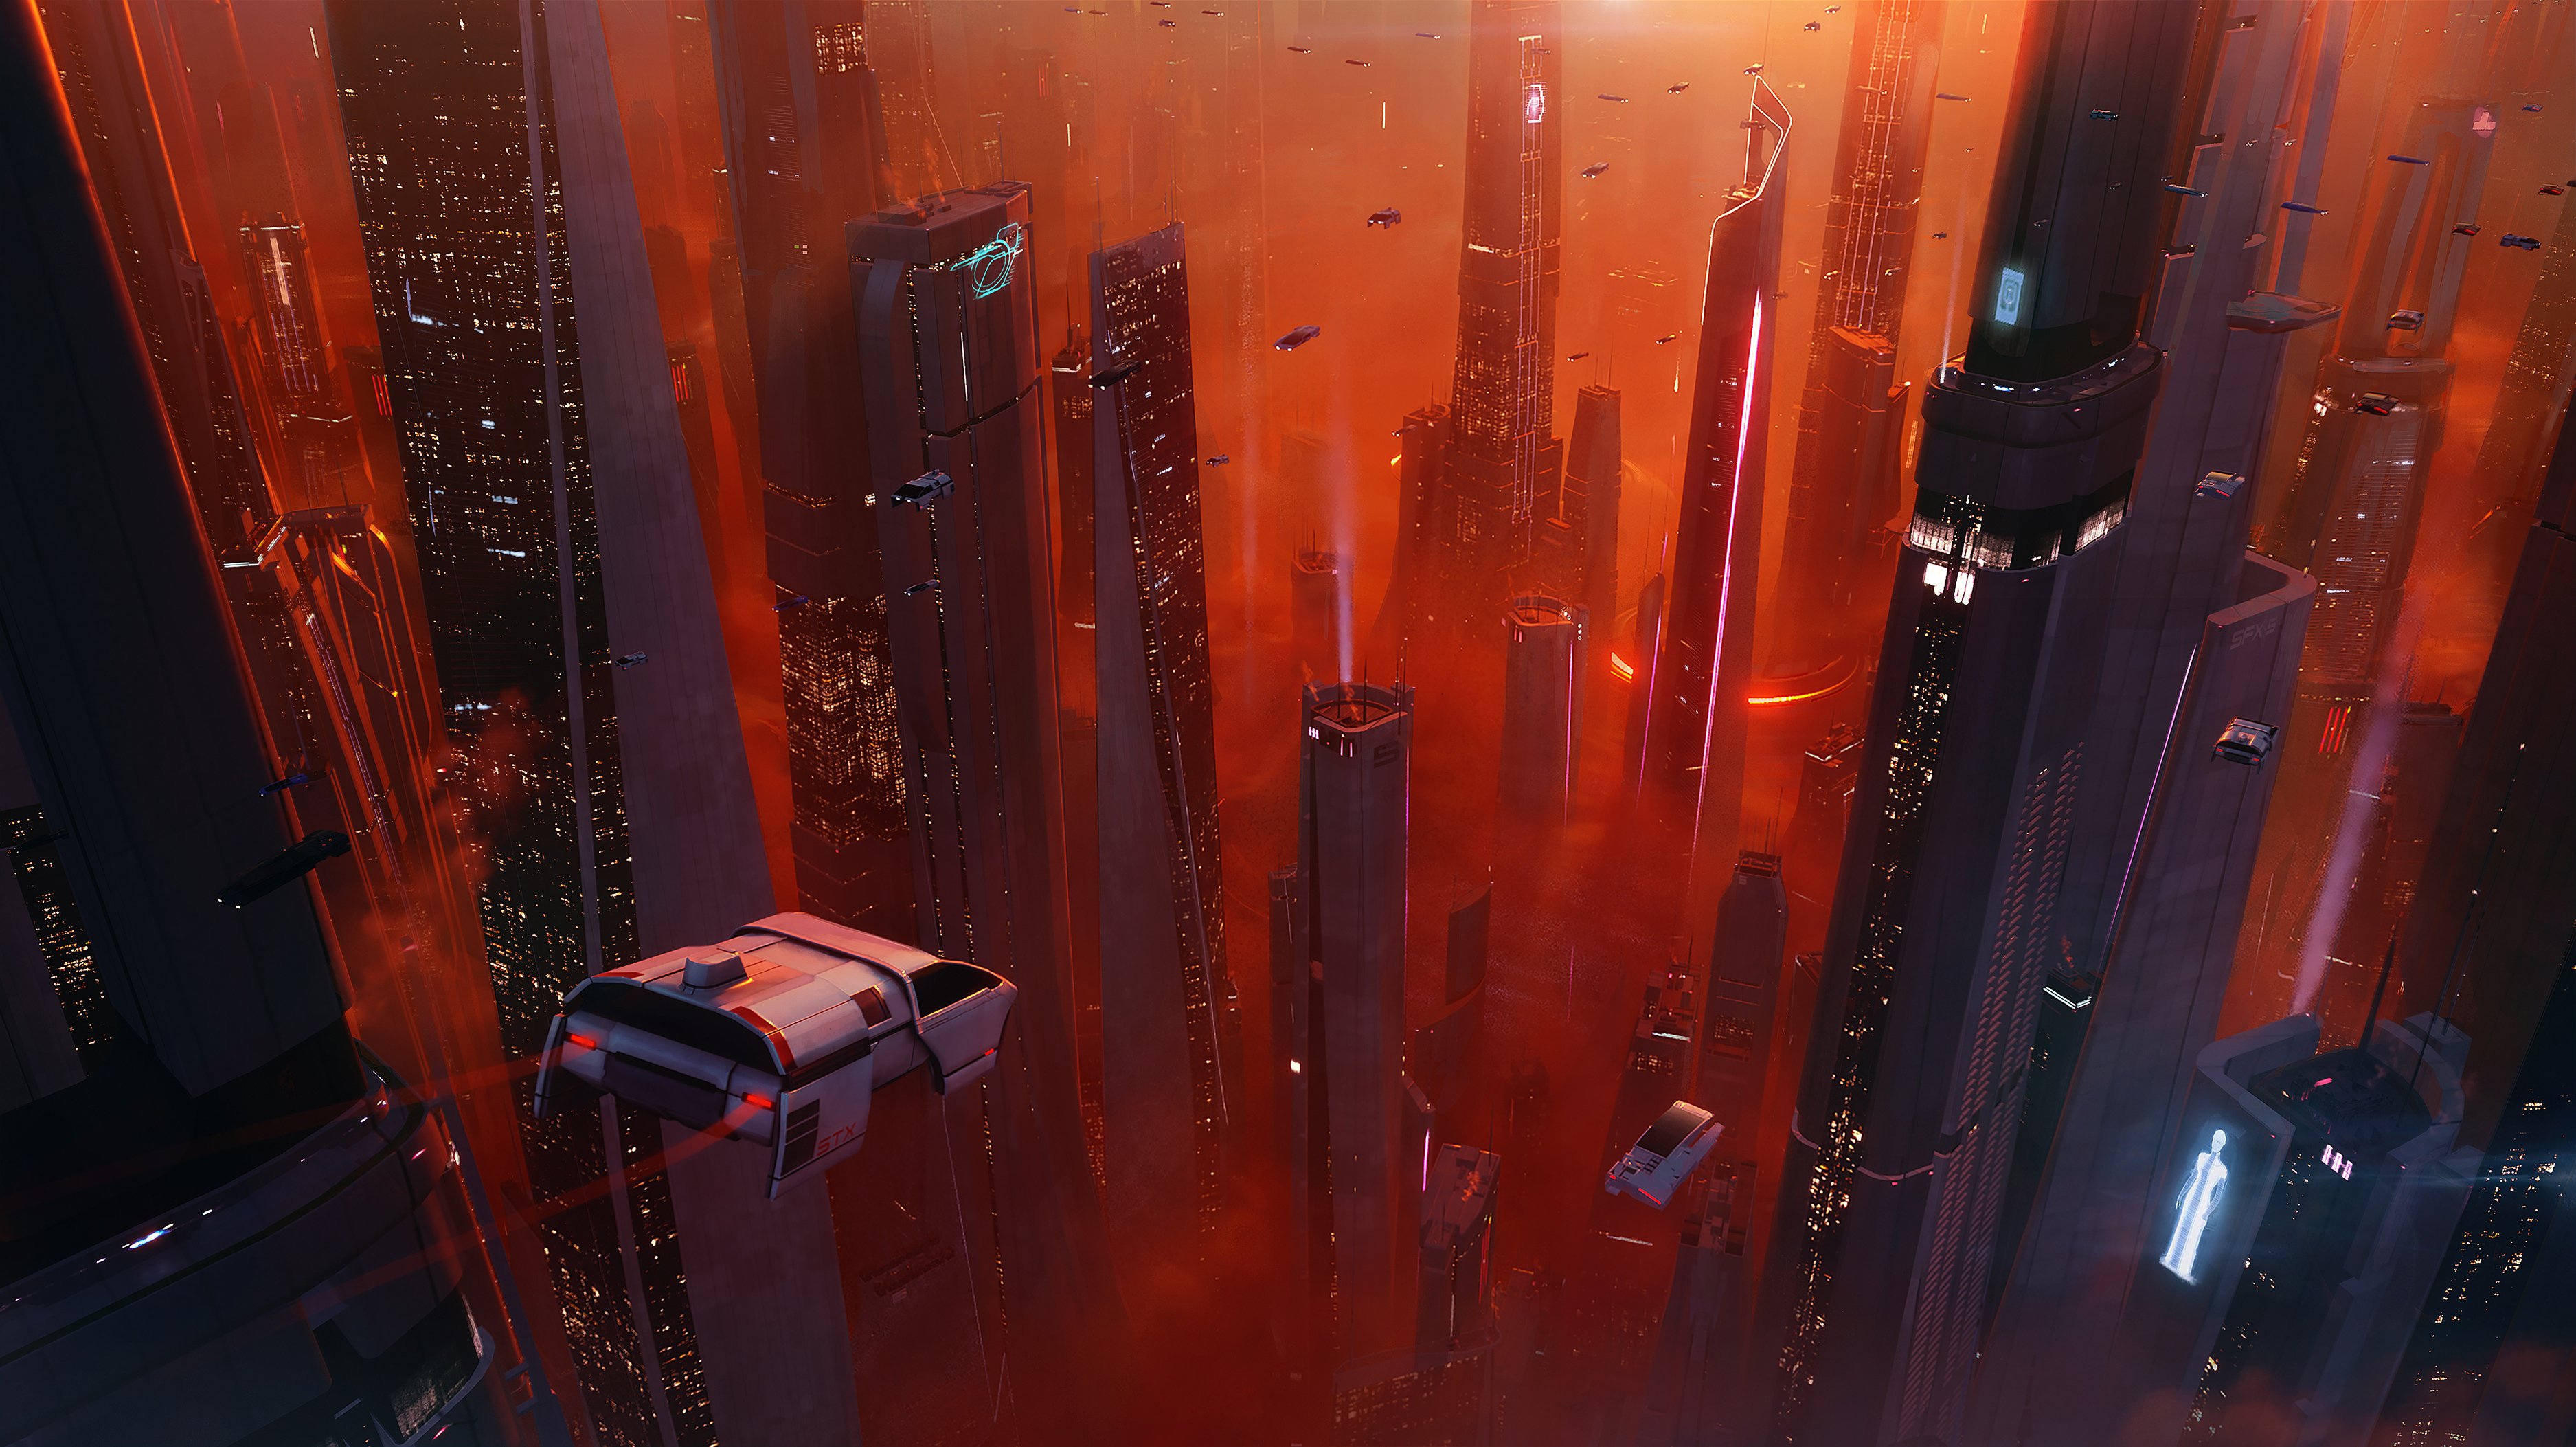 Mass Effect 5 teaser images published on N7 day featuring spaceships flying over futuristic cities